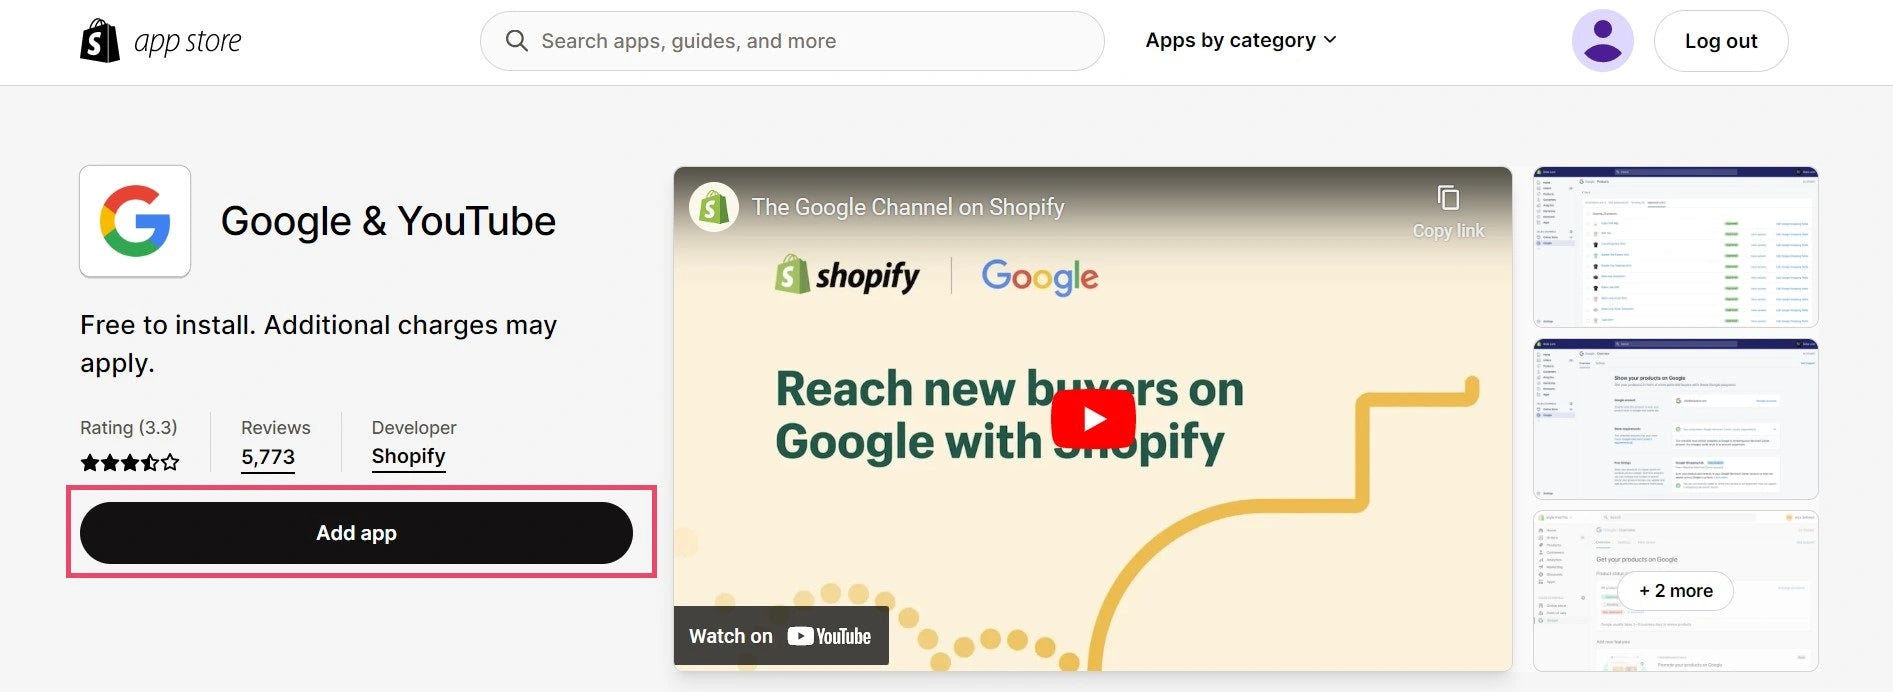 Shopify App Store - Google & YouTube sales channel